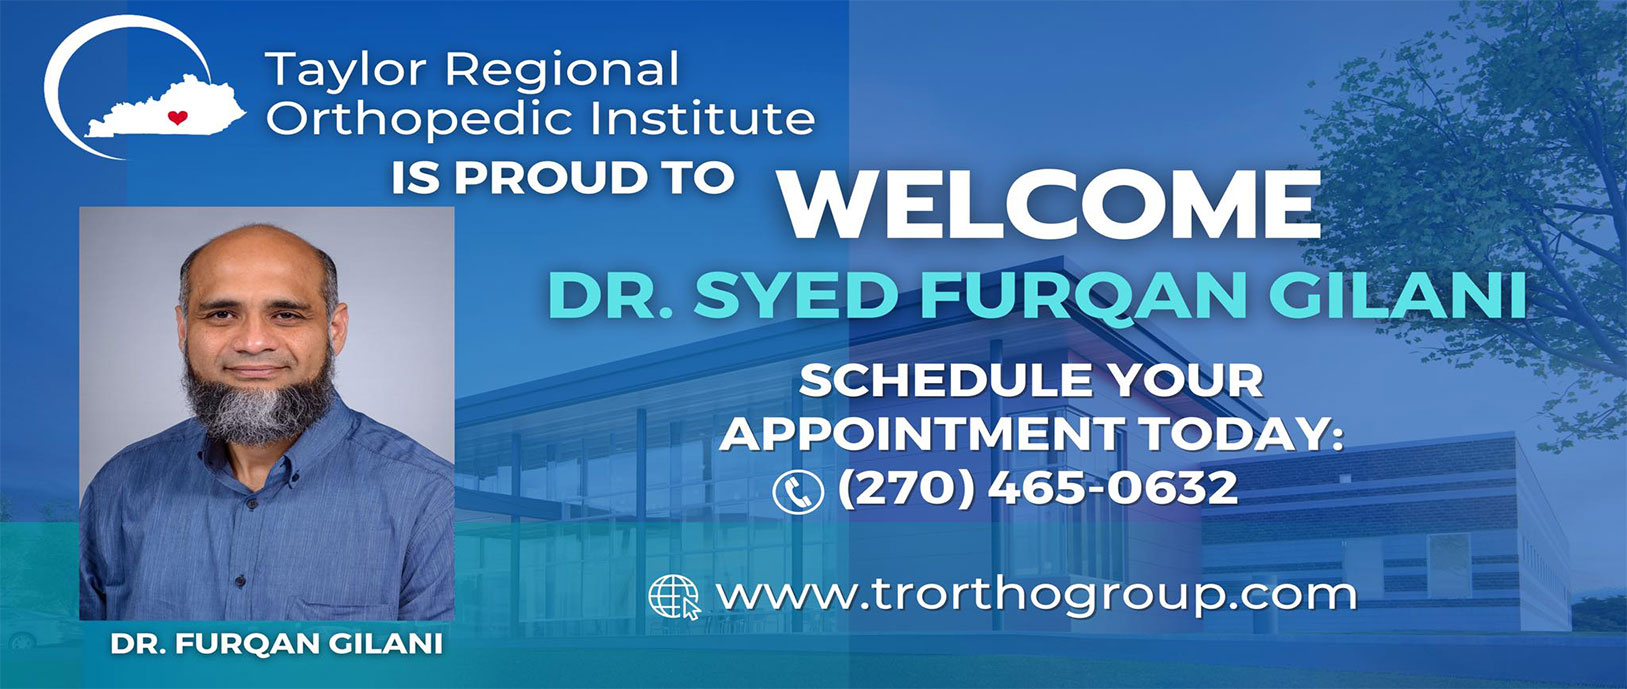 Taylor Regional Orthopedic Institute is proud to Welcome Dr. Syed Furqan Gilani 

Schedule your appointment today: (270)465-0632

www.trorthogroup.com